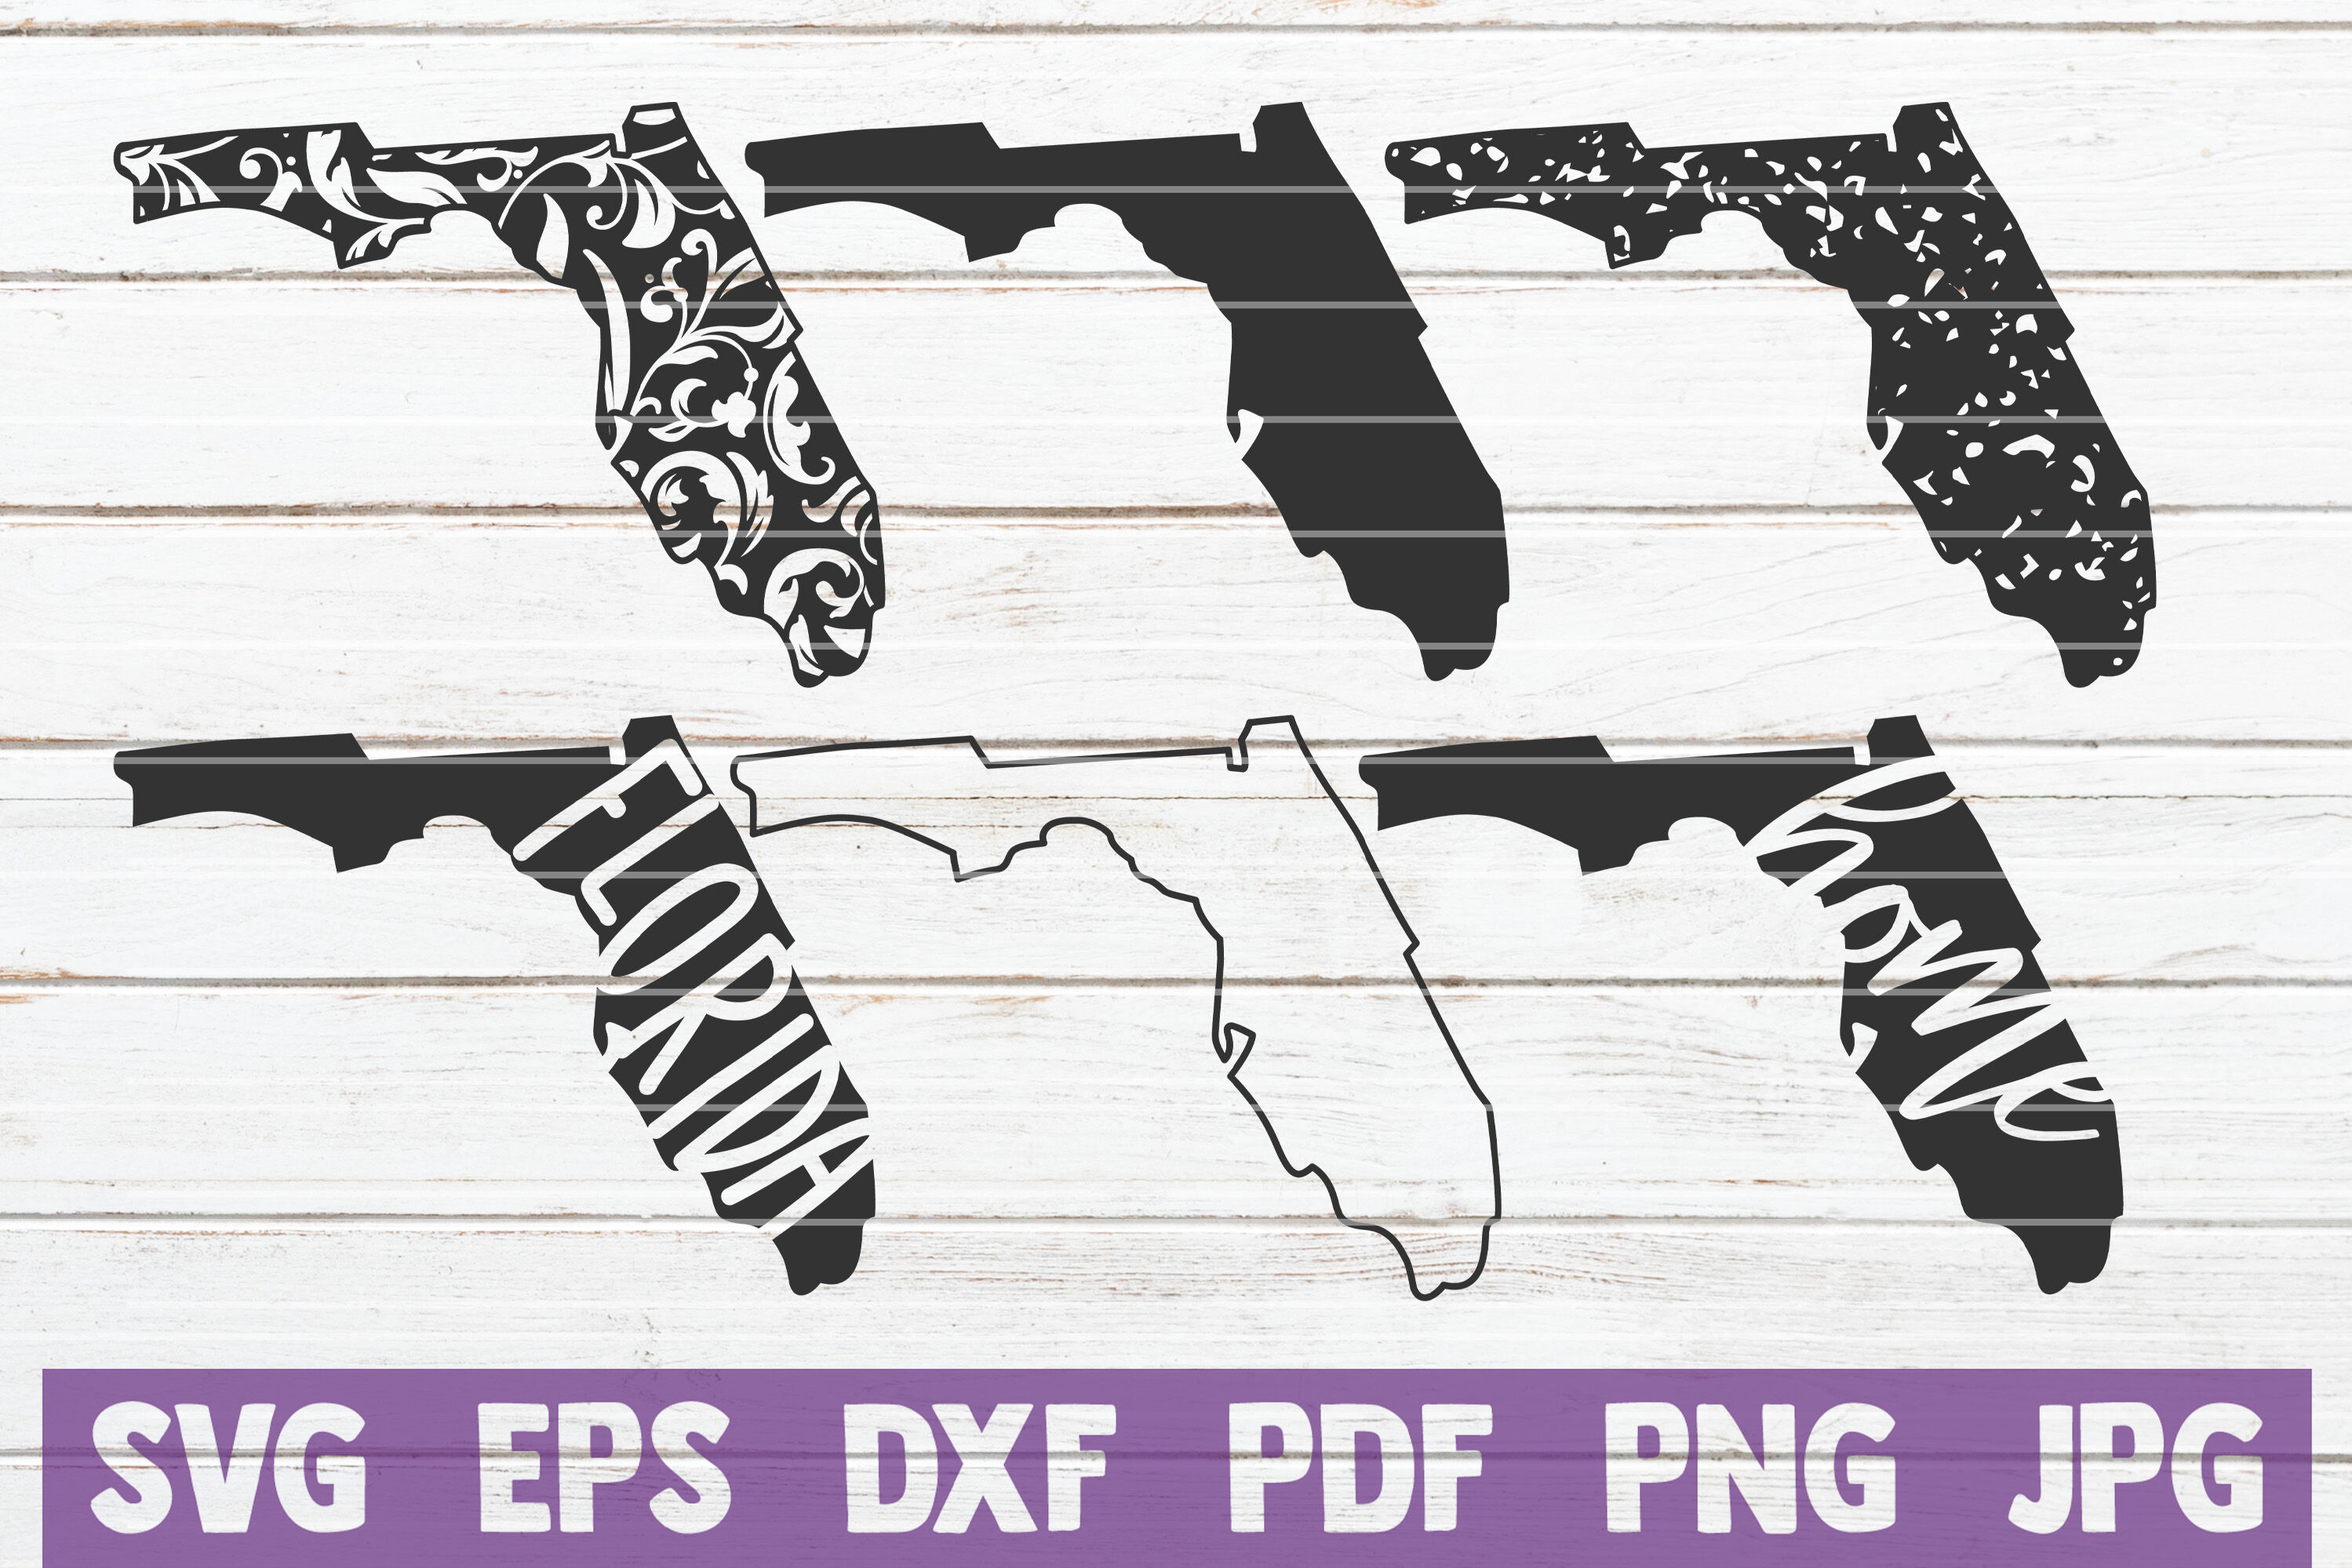 Download All 50 USA States SVG Bundle | Cut Files By ...